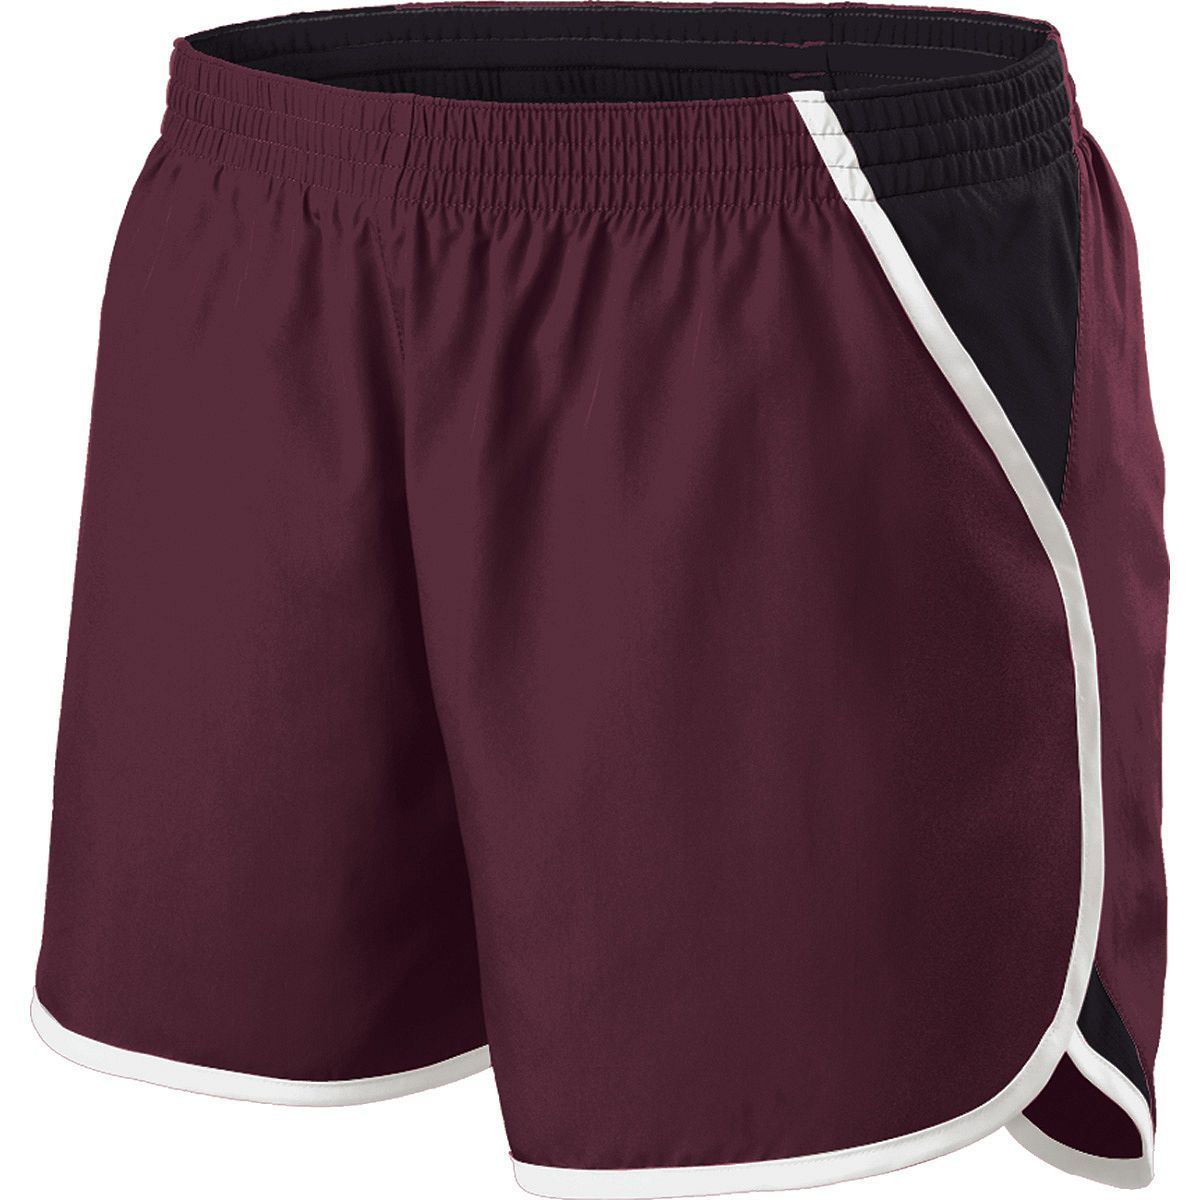 Holloway Energize Shorts in Maroon/Black/White  -Part of the Ladies, Ladies-Shorts, Holloway product lines at KanaleyCreations.com